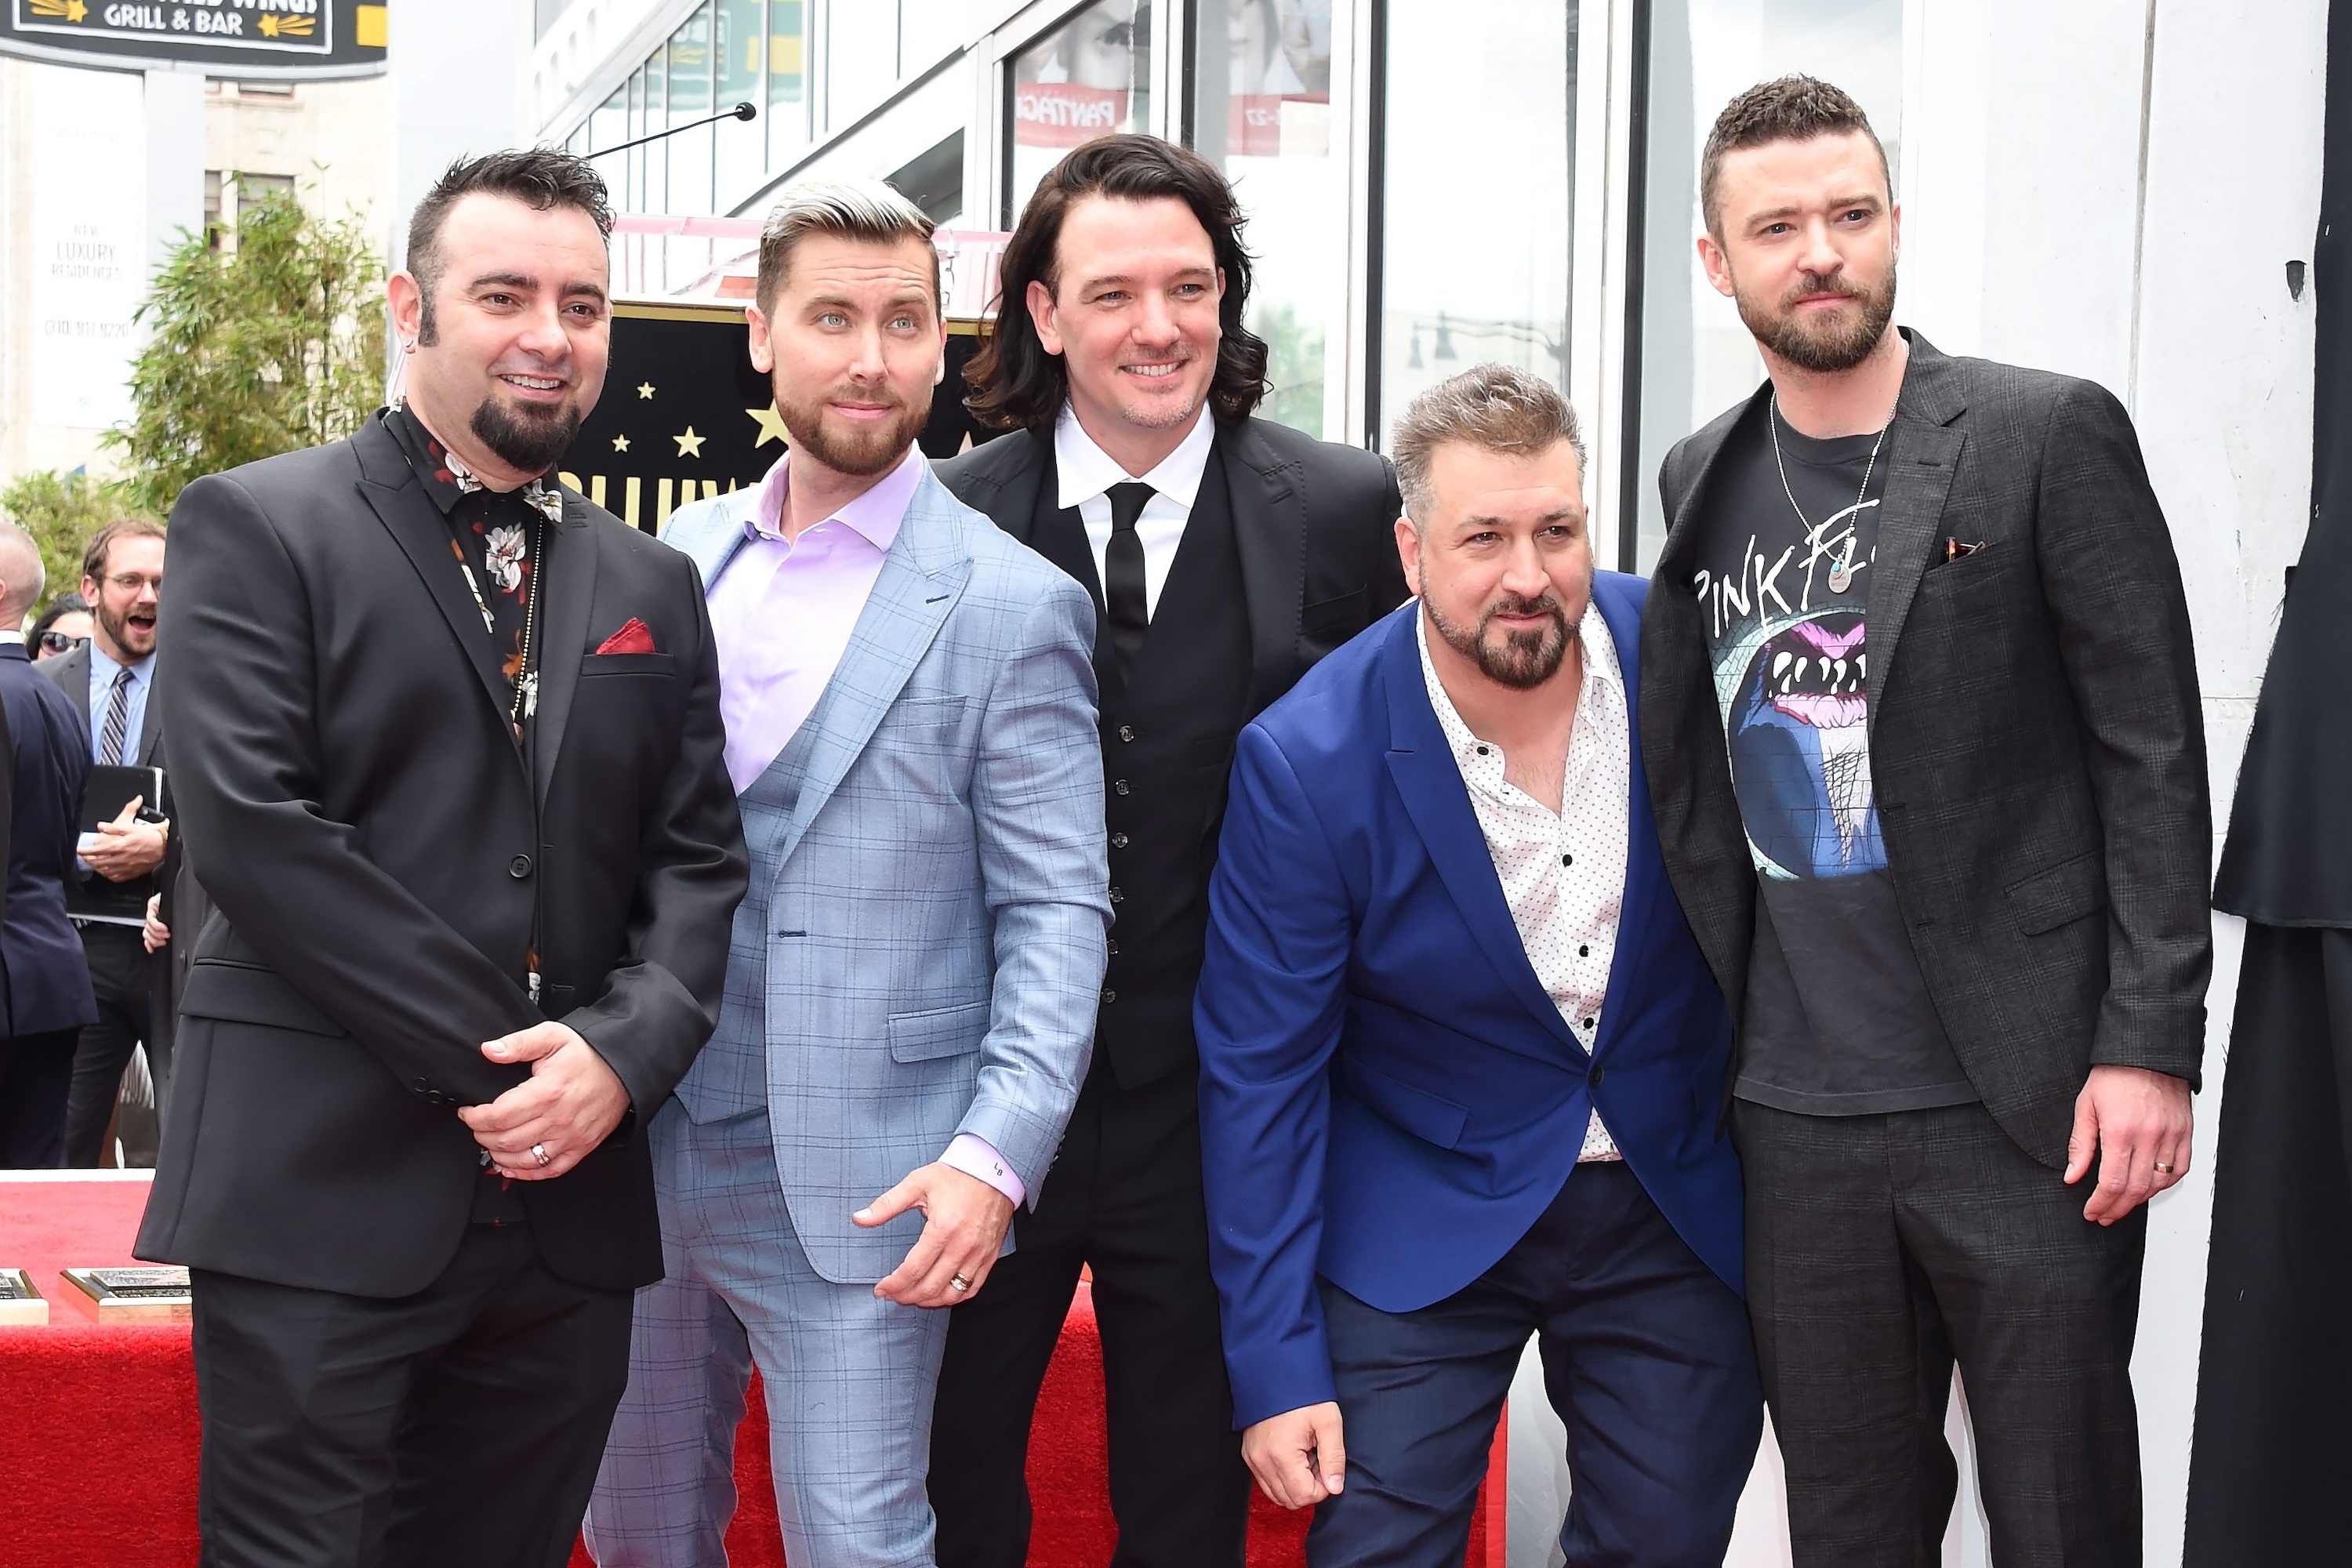 Joey Fatone says he was blindsided when Justin Timberlake left NSYNC